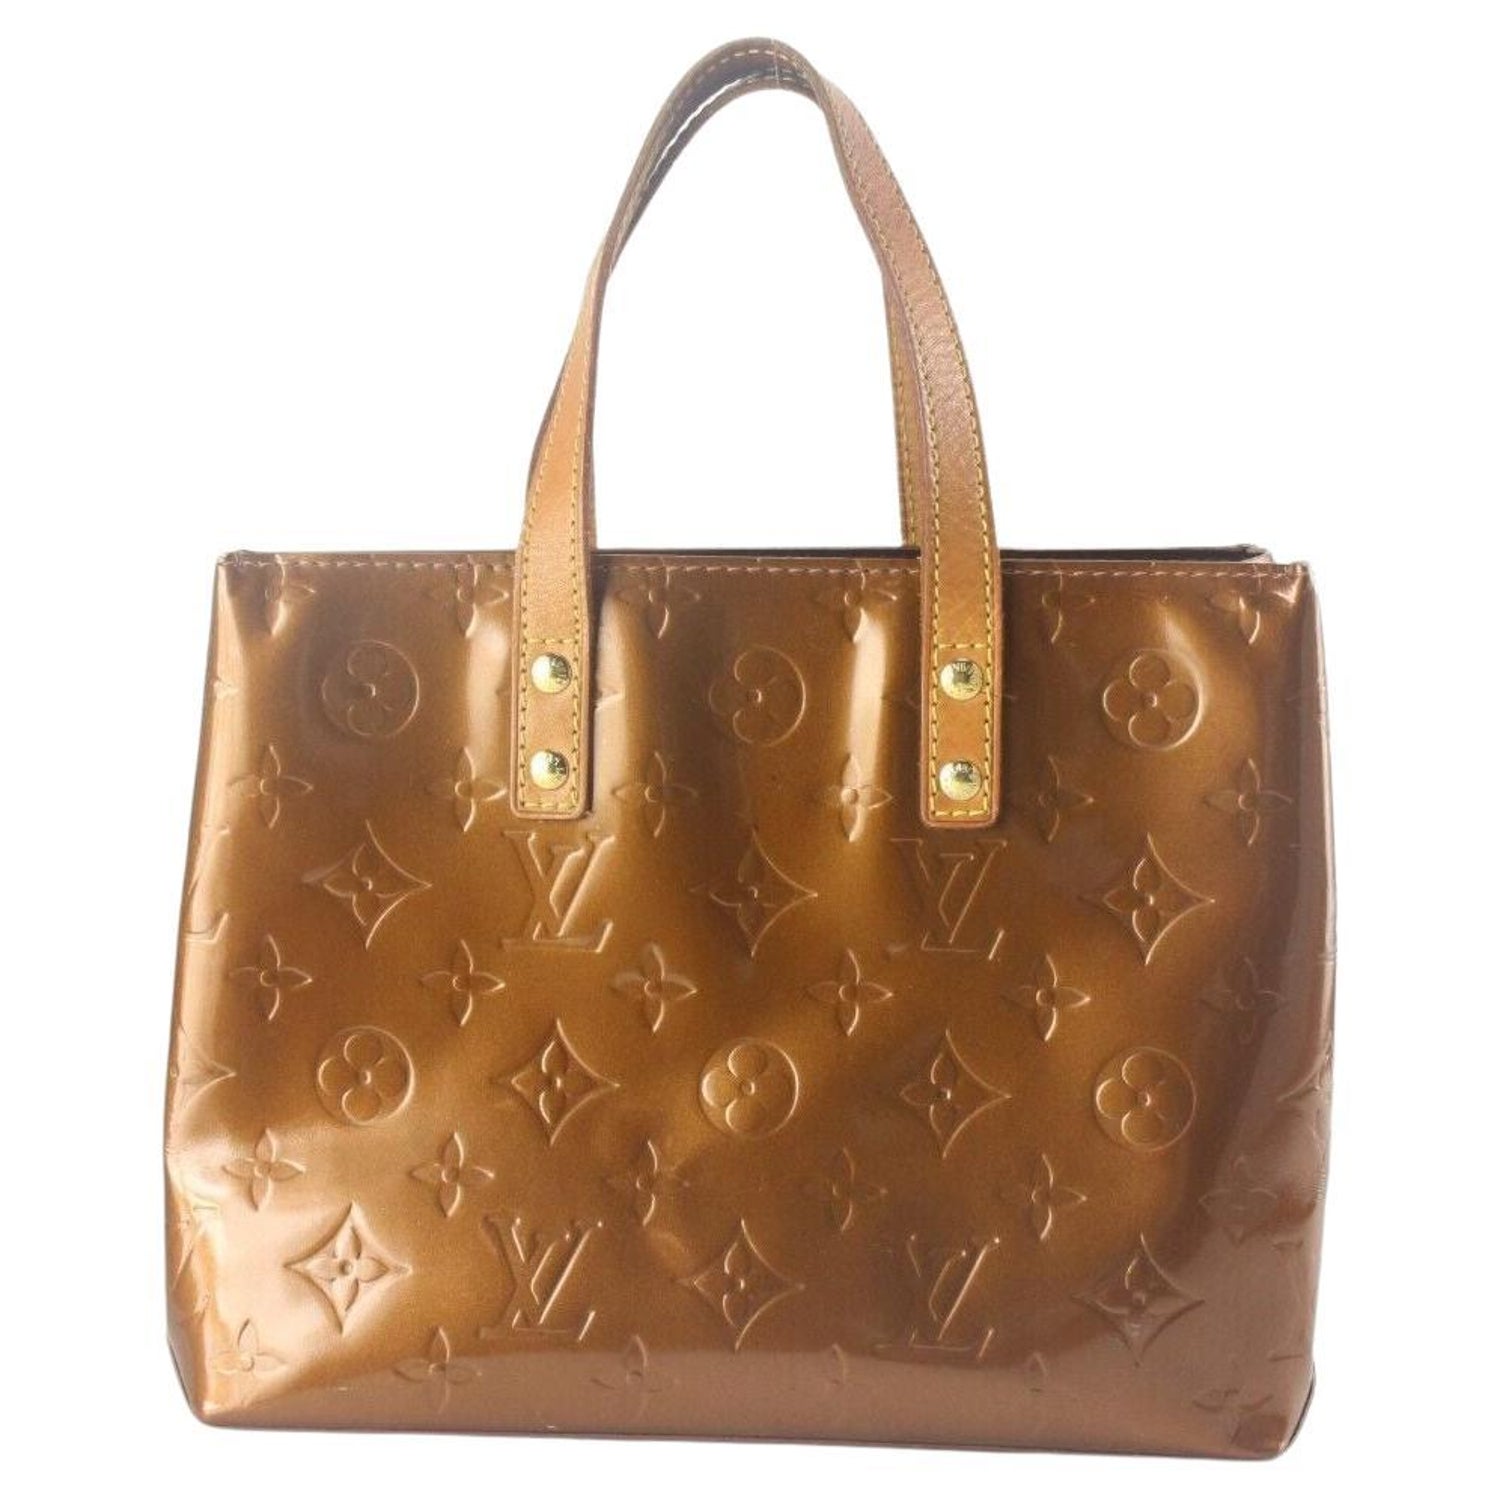 Louis Vuitton 2000 - 255 For Sale on 1stDibs